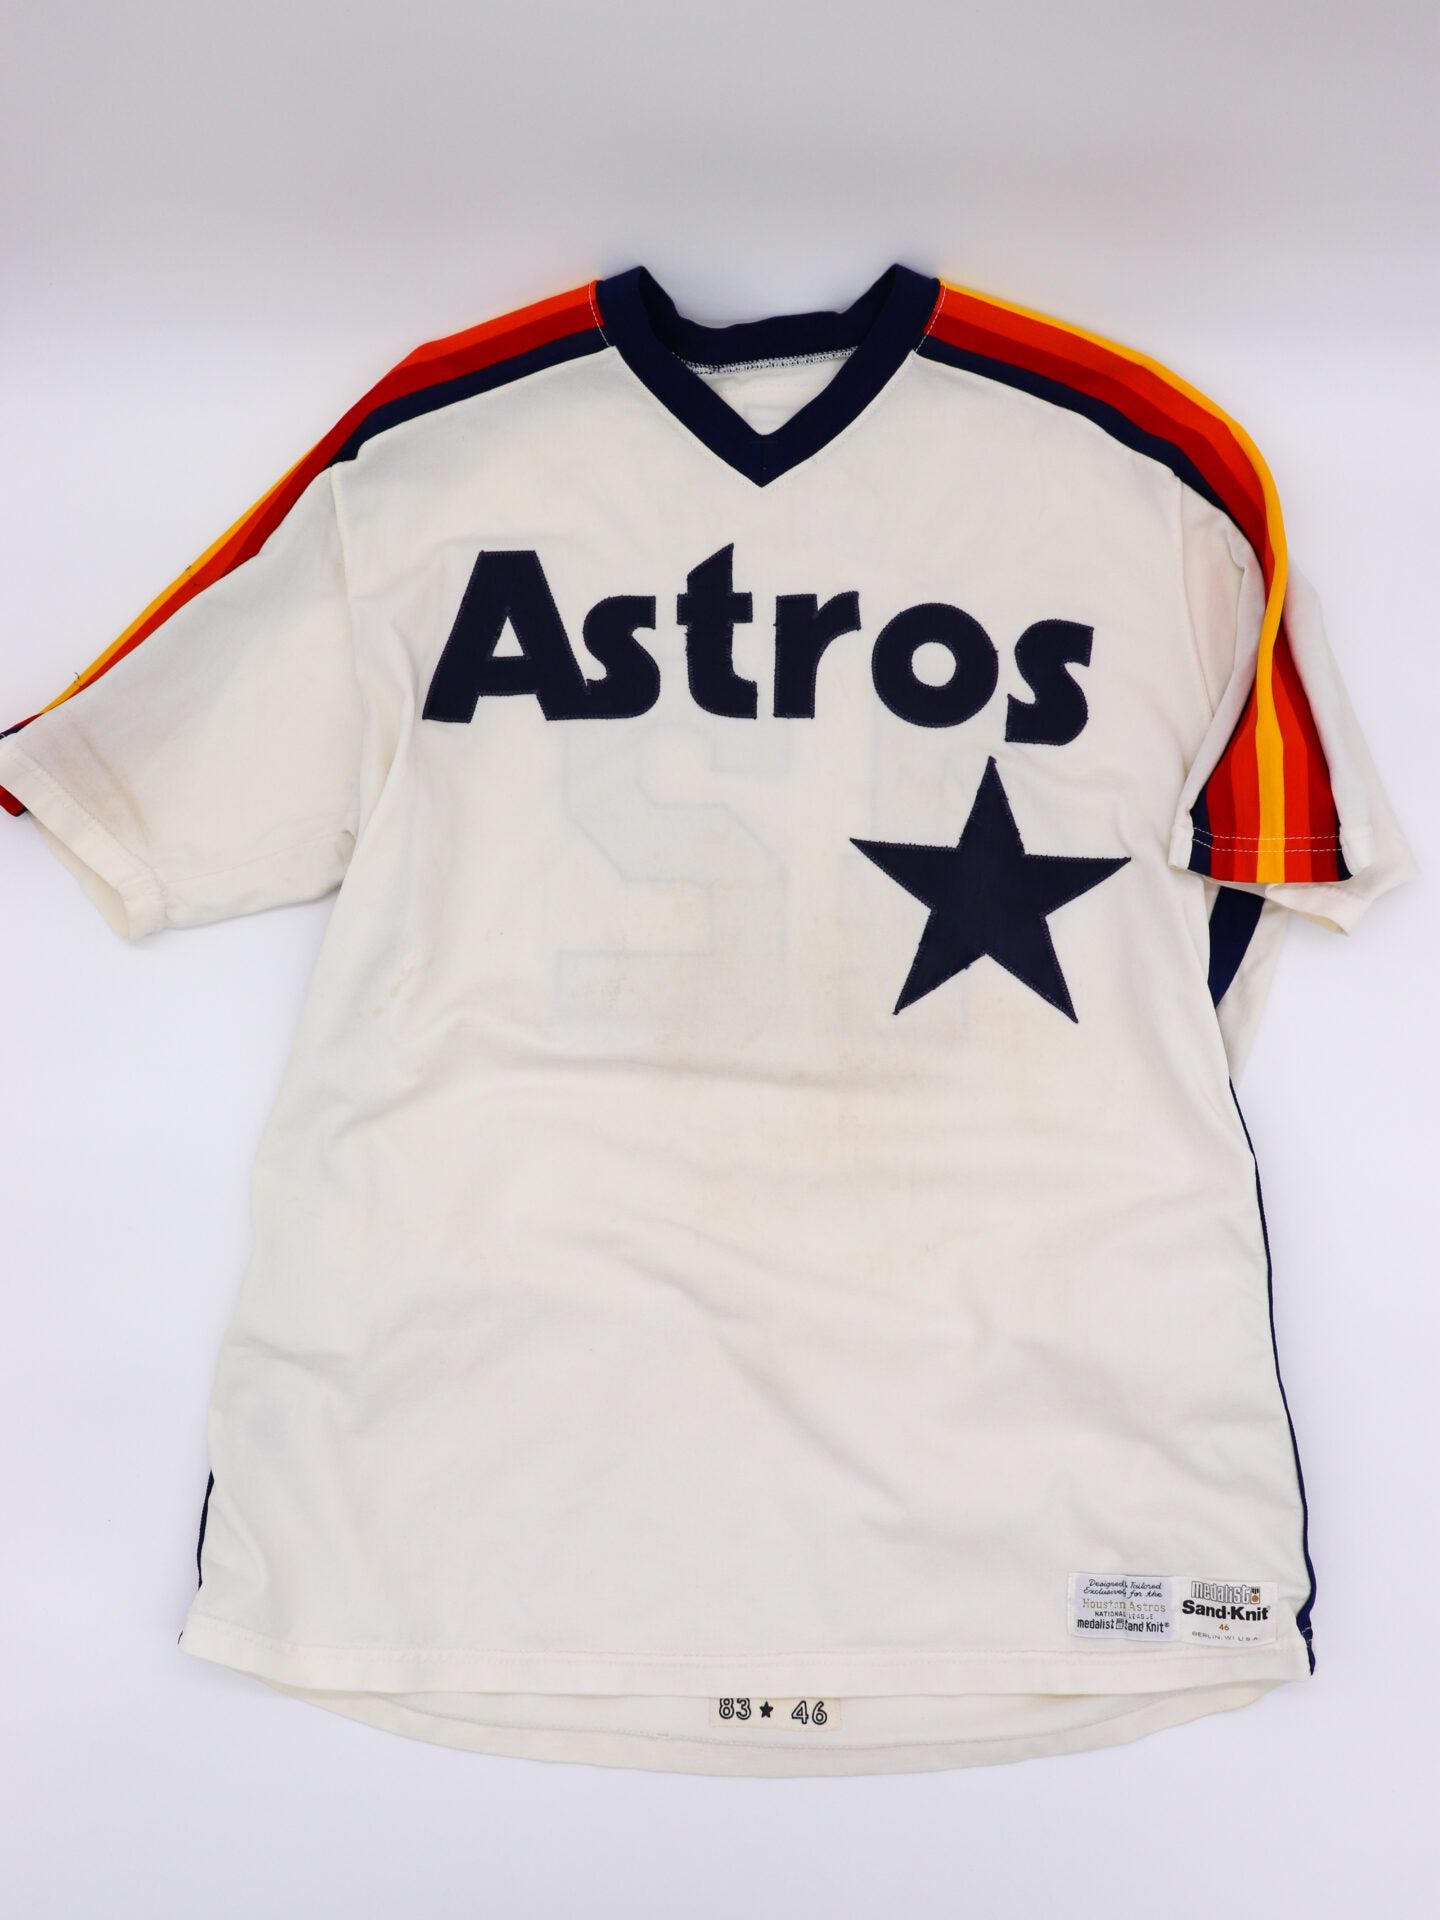 Houston Astros Signed Jerseys, Collectible Astros Jerseys